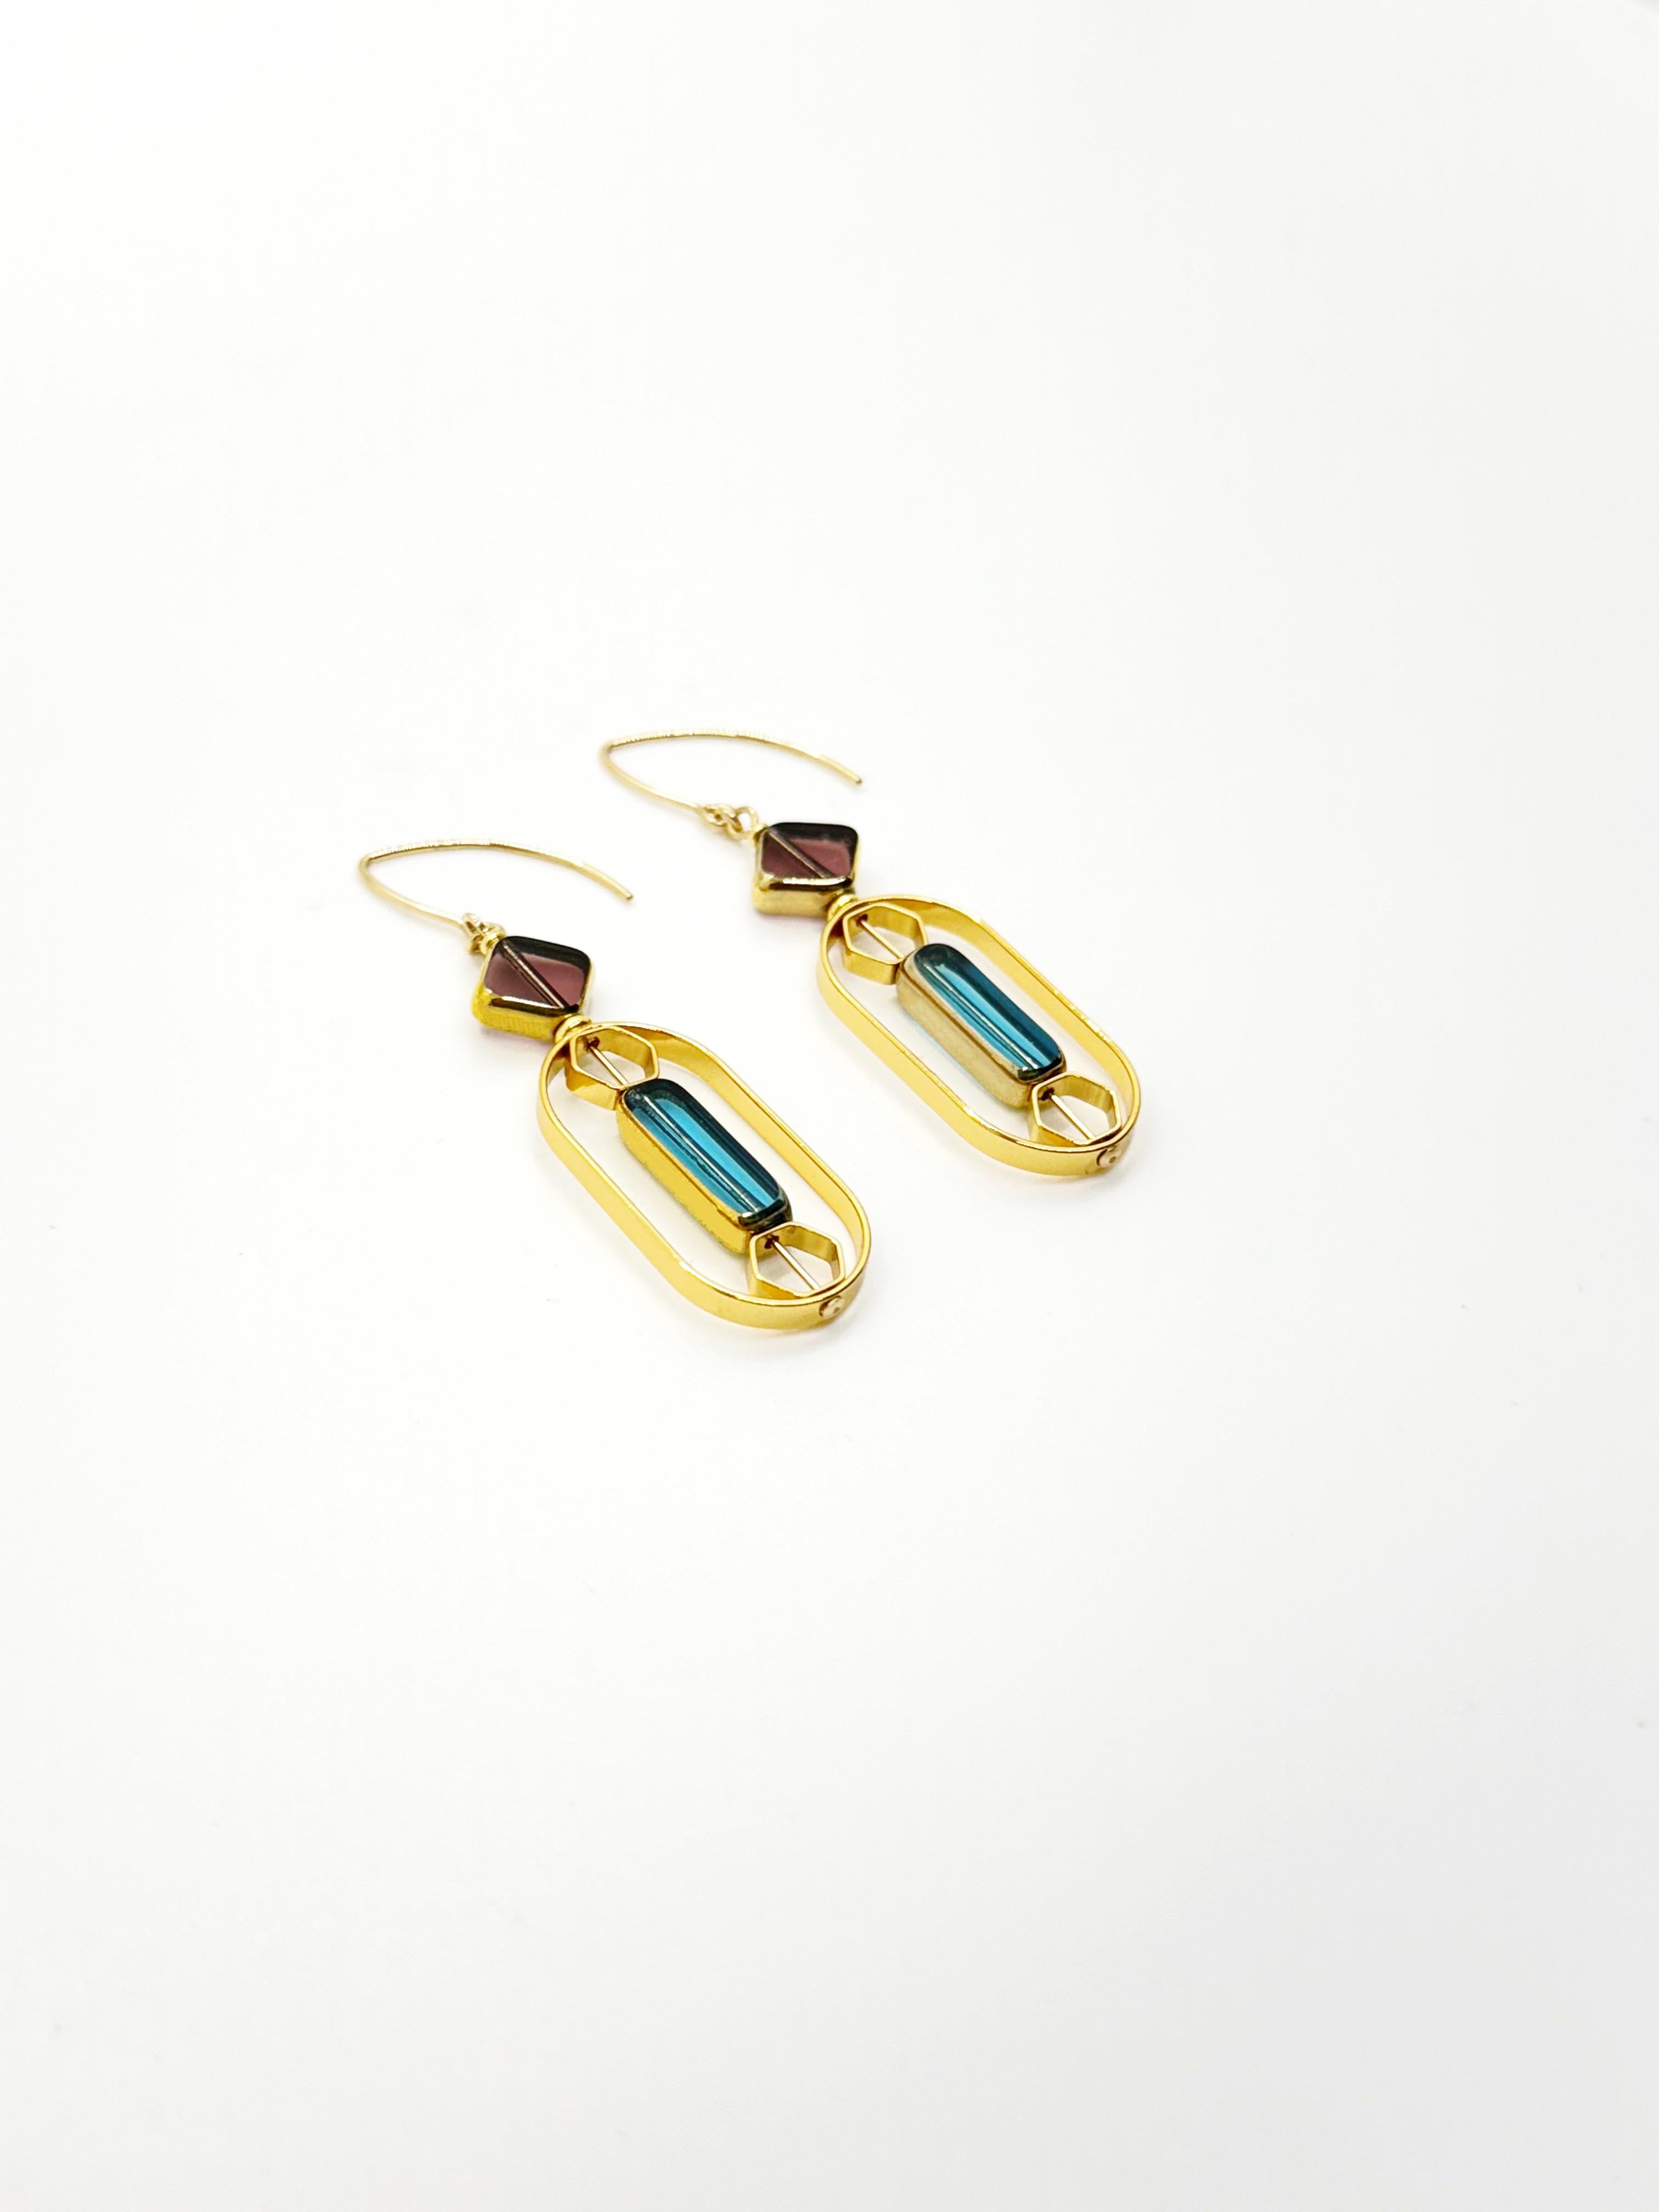 Translucent Burgundy And Light Blue Art Deco 2416E Earrings In New Condition For Sale In Monrovia, CA